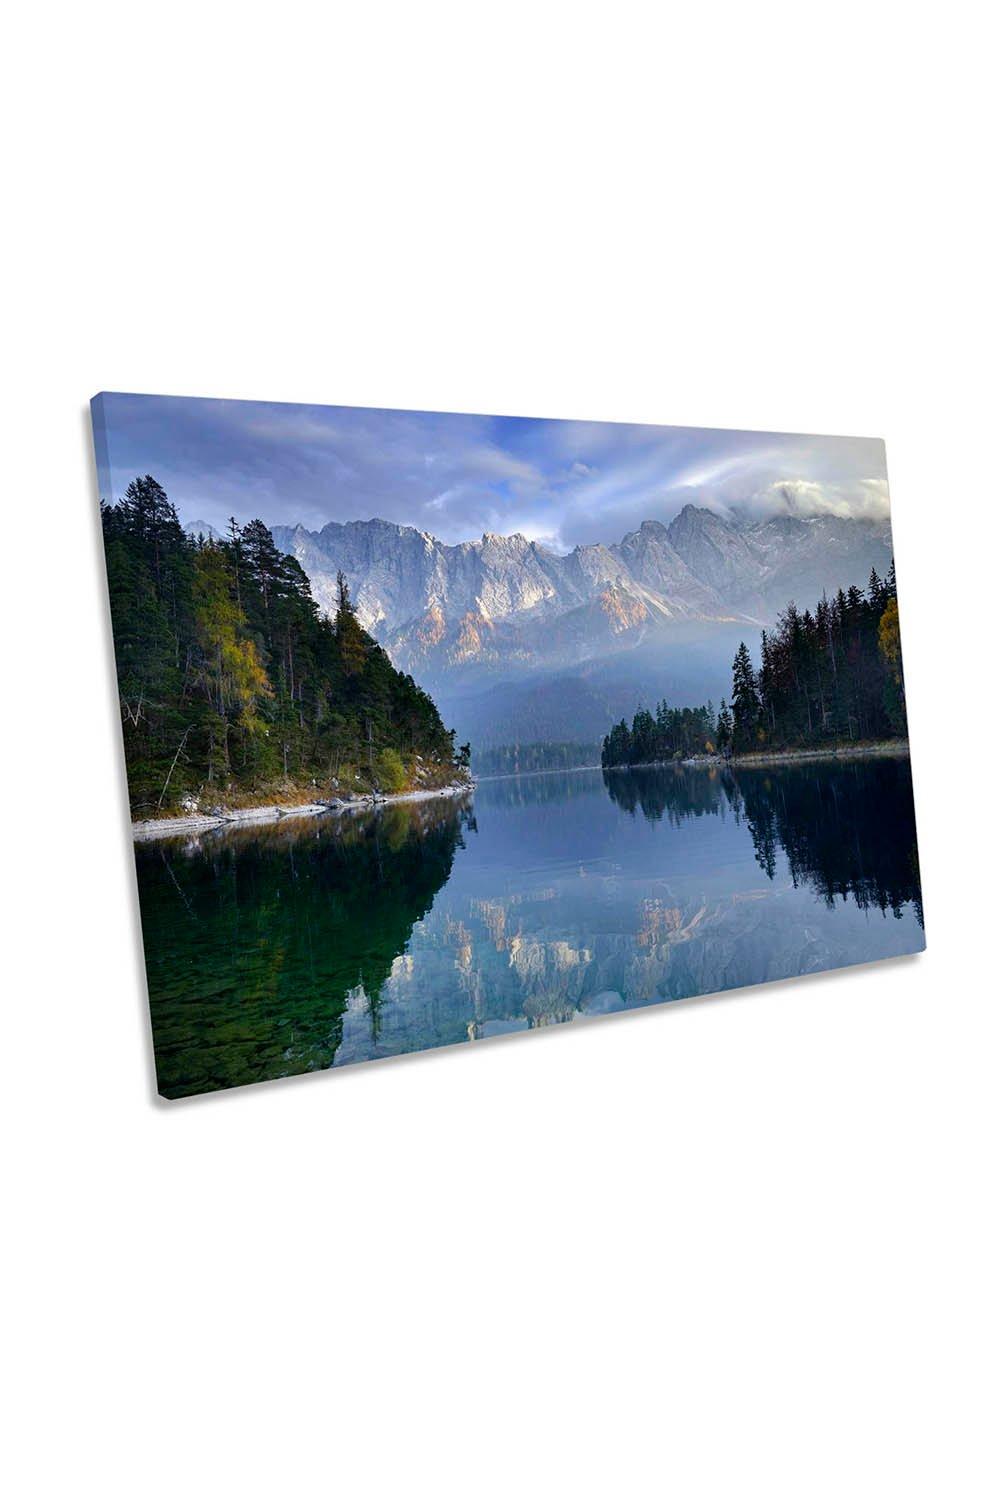 October Days Mountain Landscape Lake Canvas Wall Art Picture Print